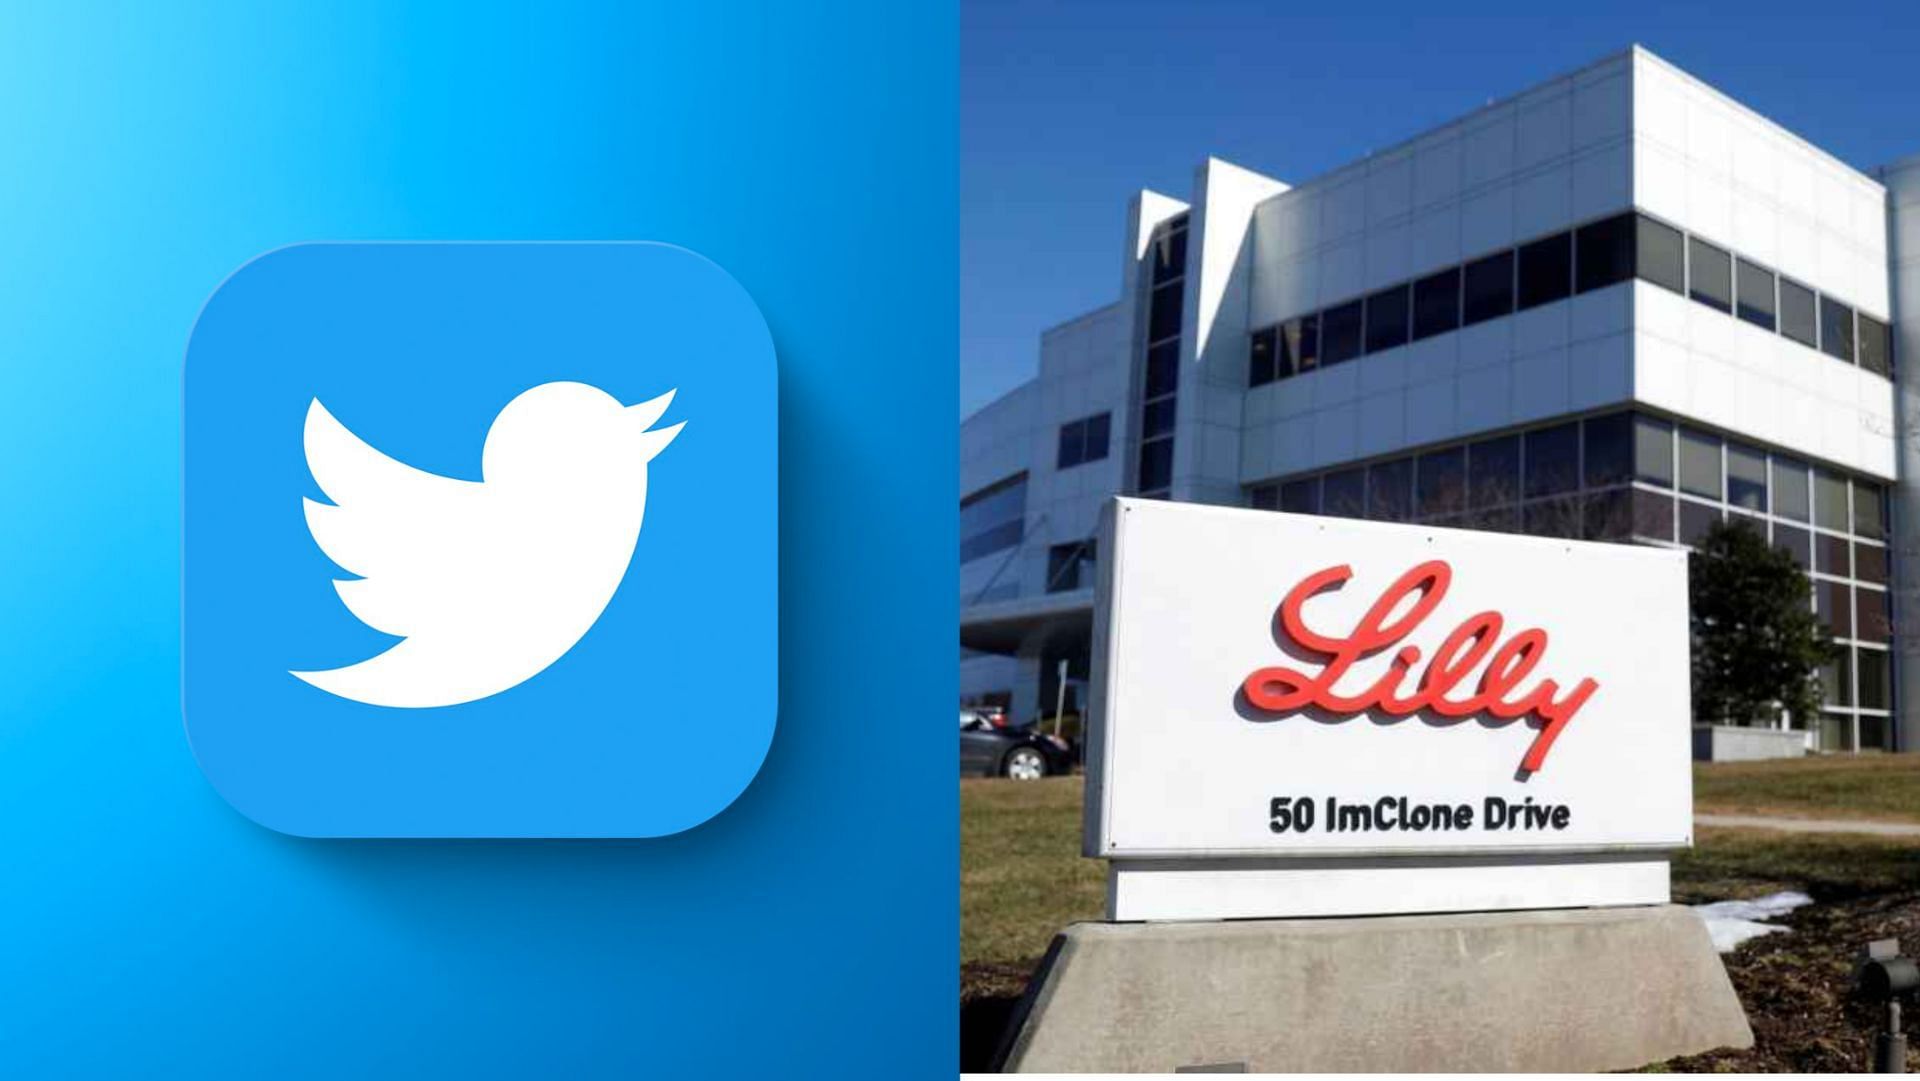 Ely Lilly recently bore the brunt of the impersonators gaining verified profile (Images via Twitter, Getty Images)